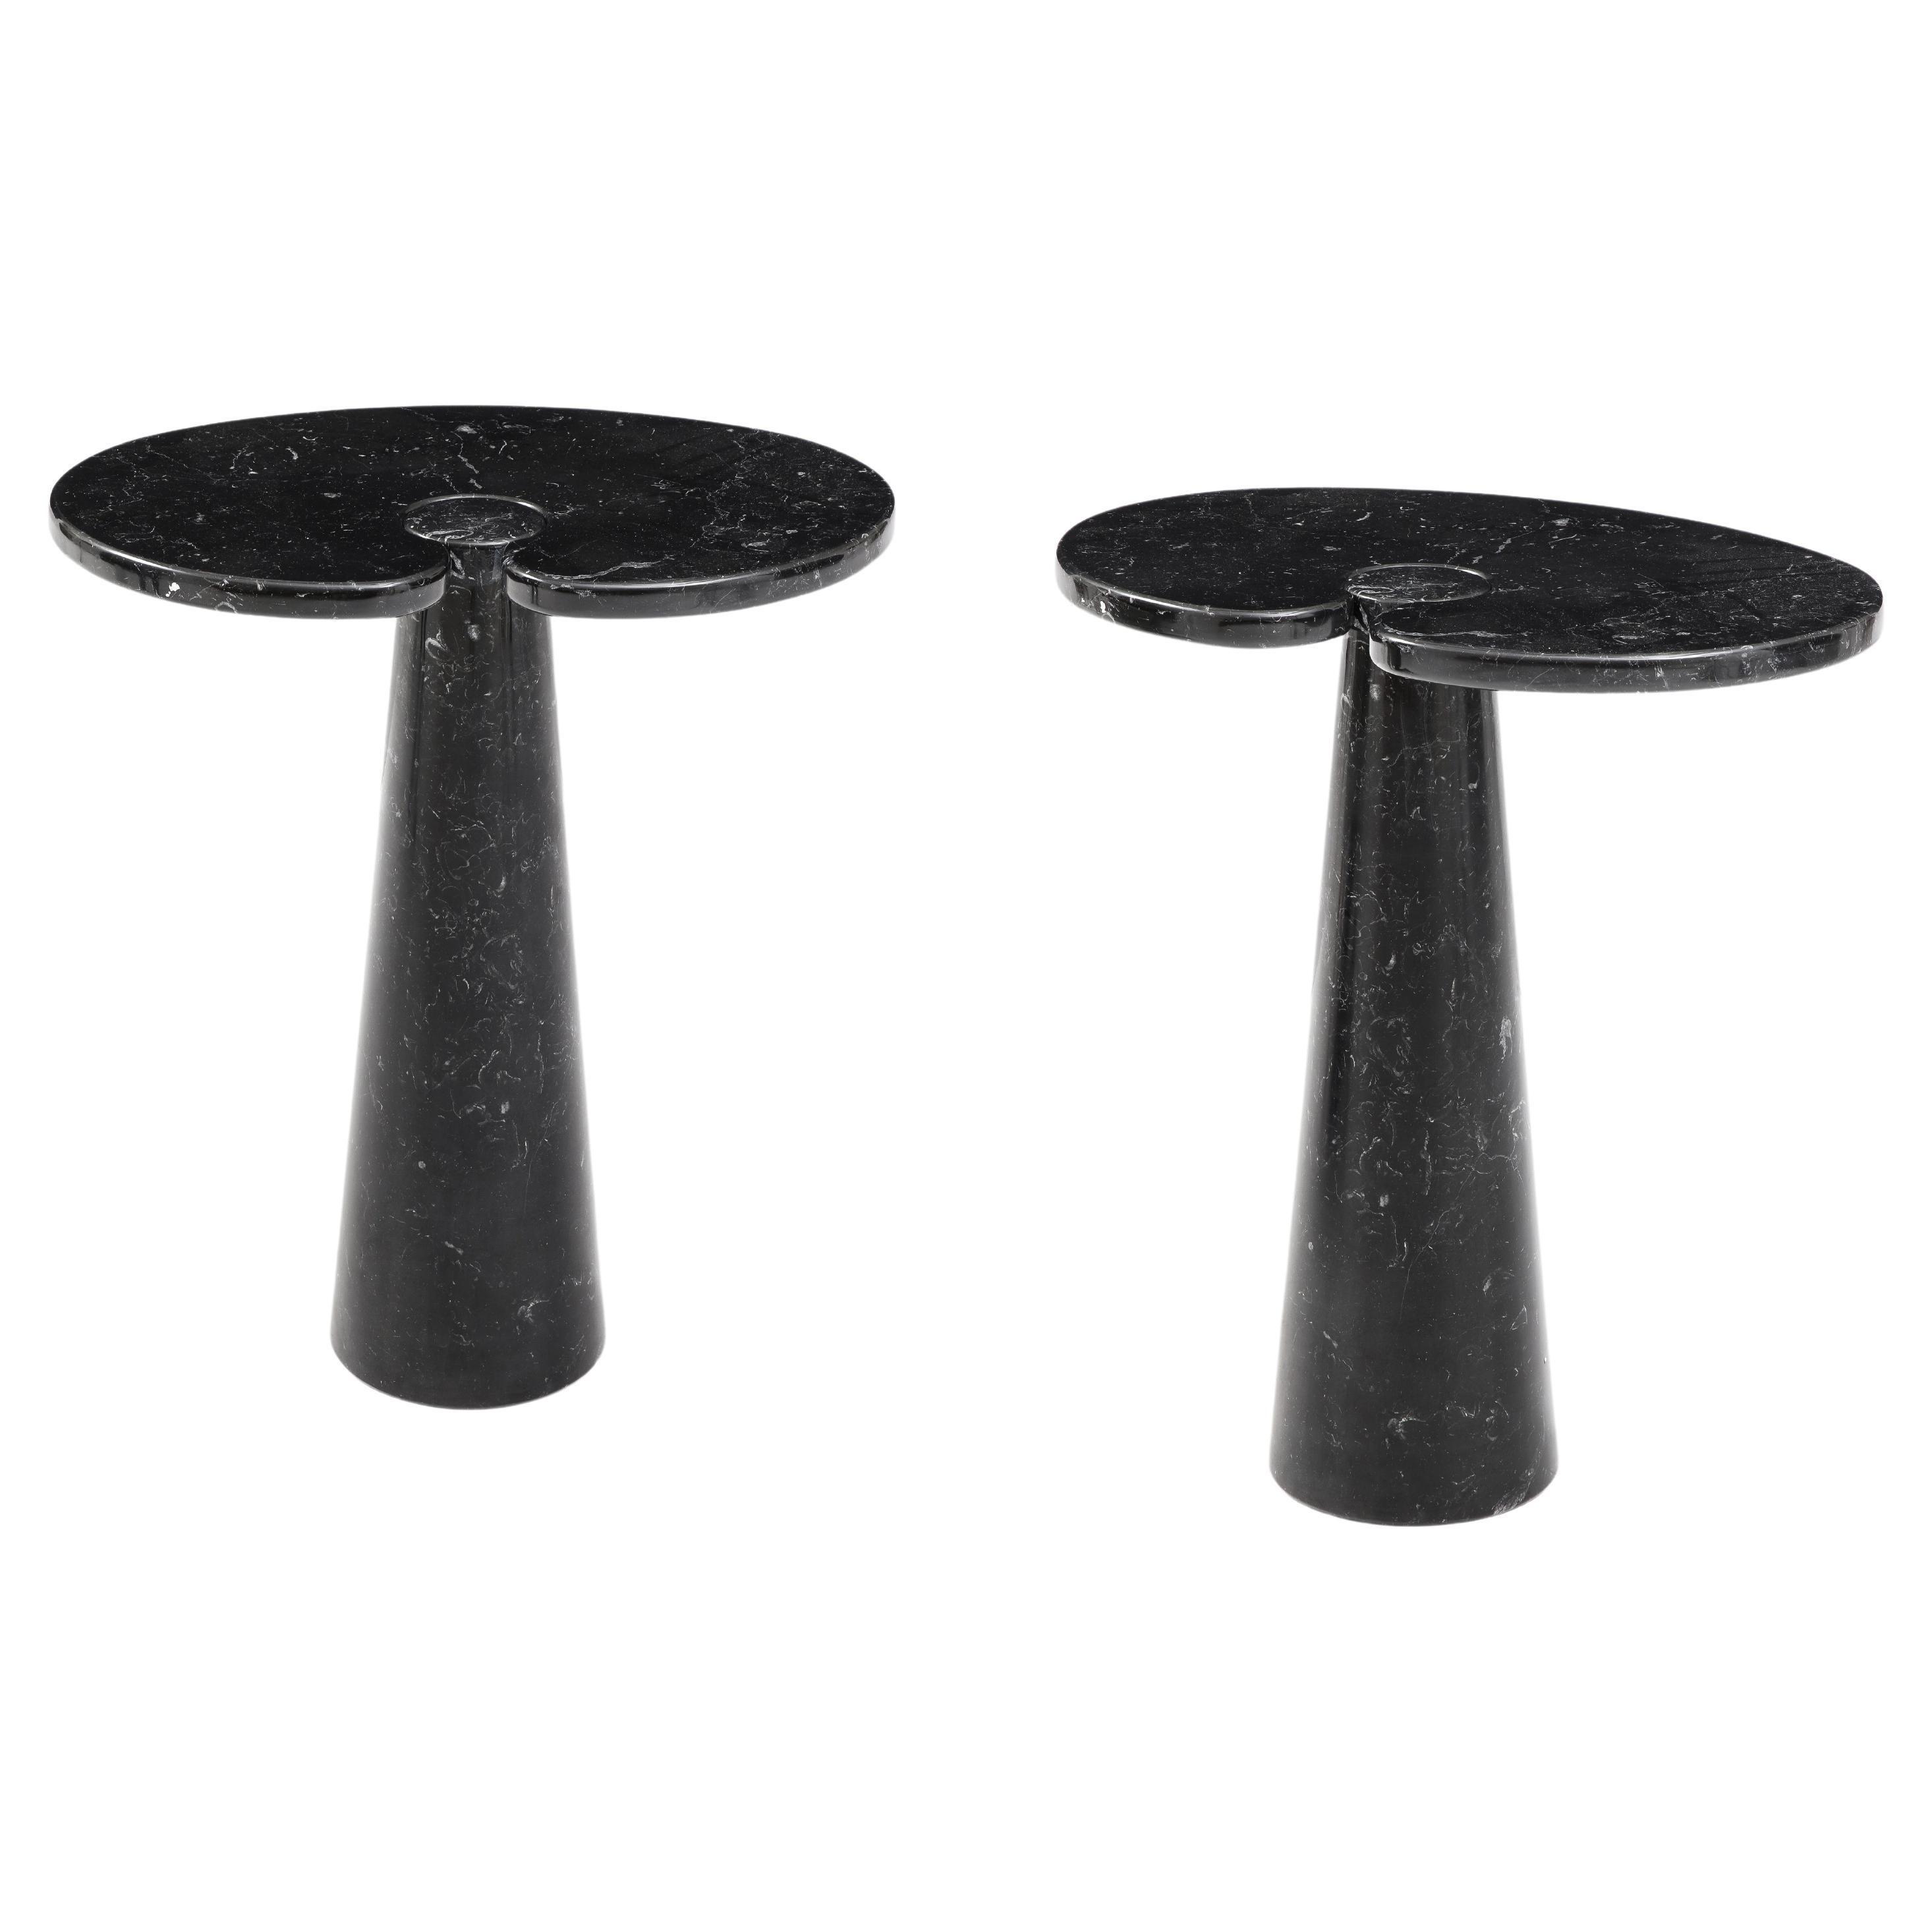 Angelo Mangiarotti Pair of Nero Marquina Eros Marble Tall Side Tables, 1971